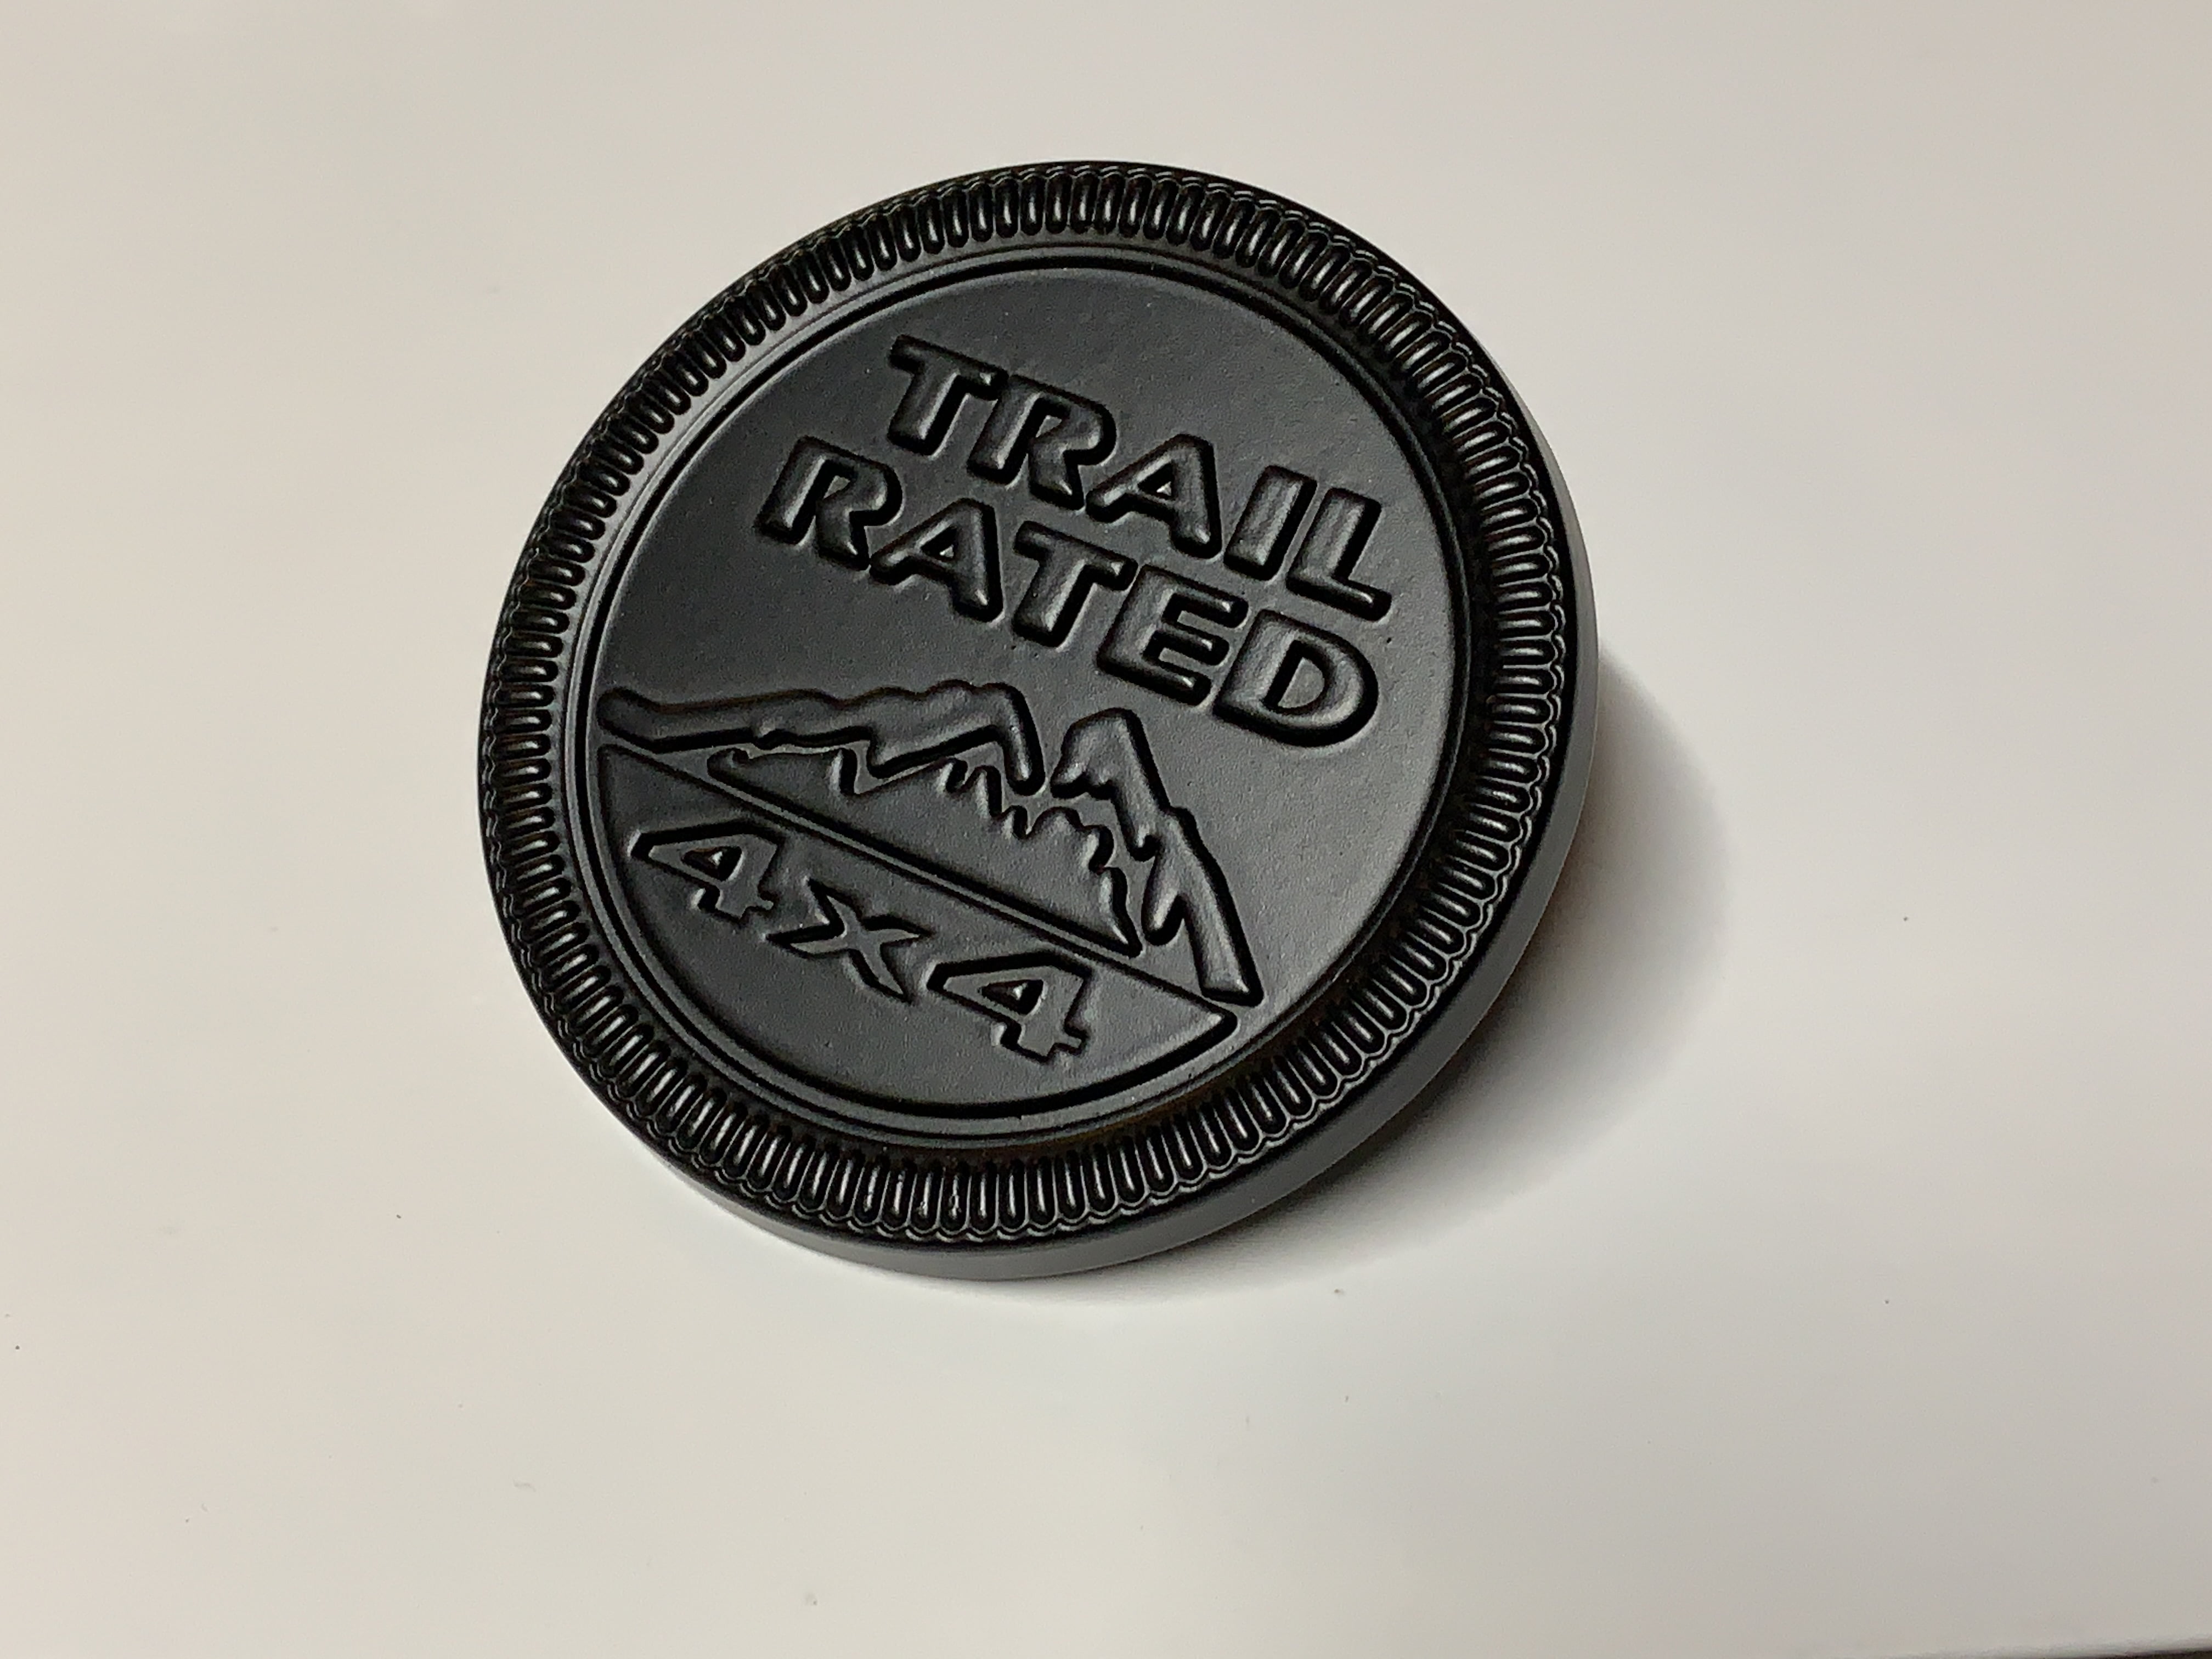 Metal Black Trail Rated 4X4 Nameplate Emblem Badge Sticker Decal Jeep Wrang...